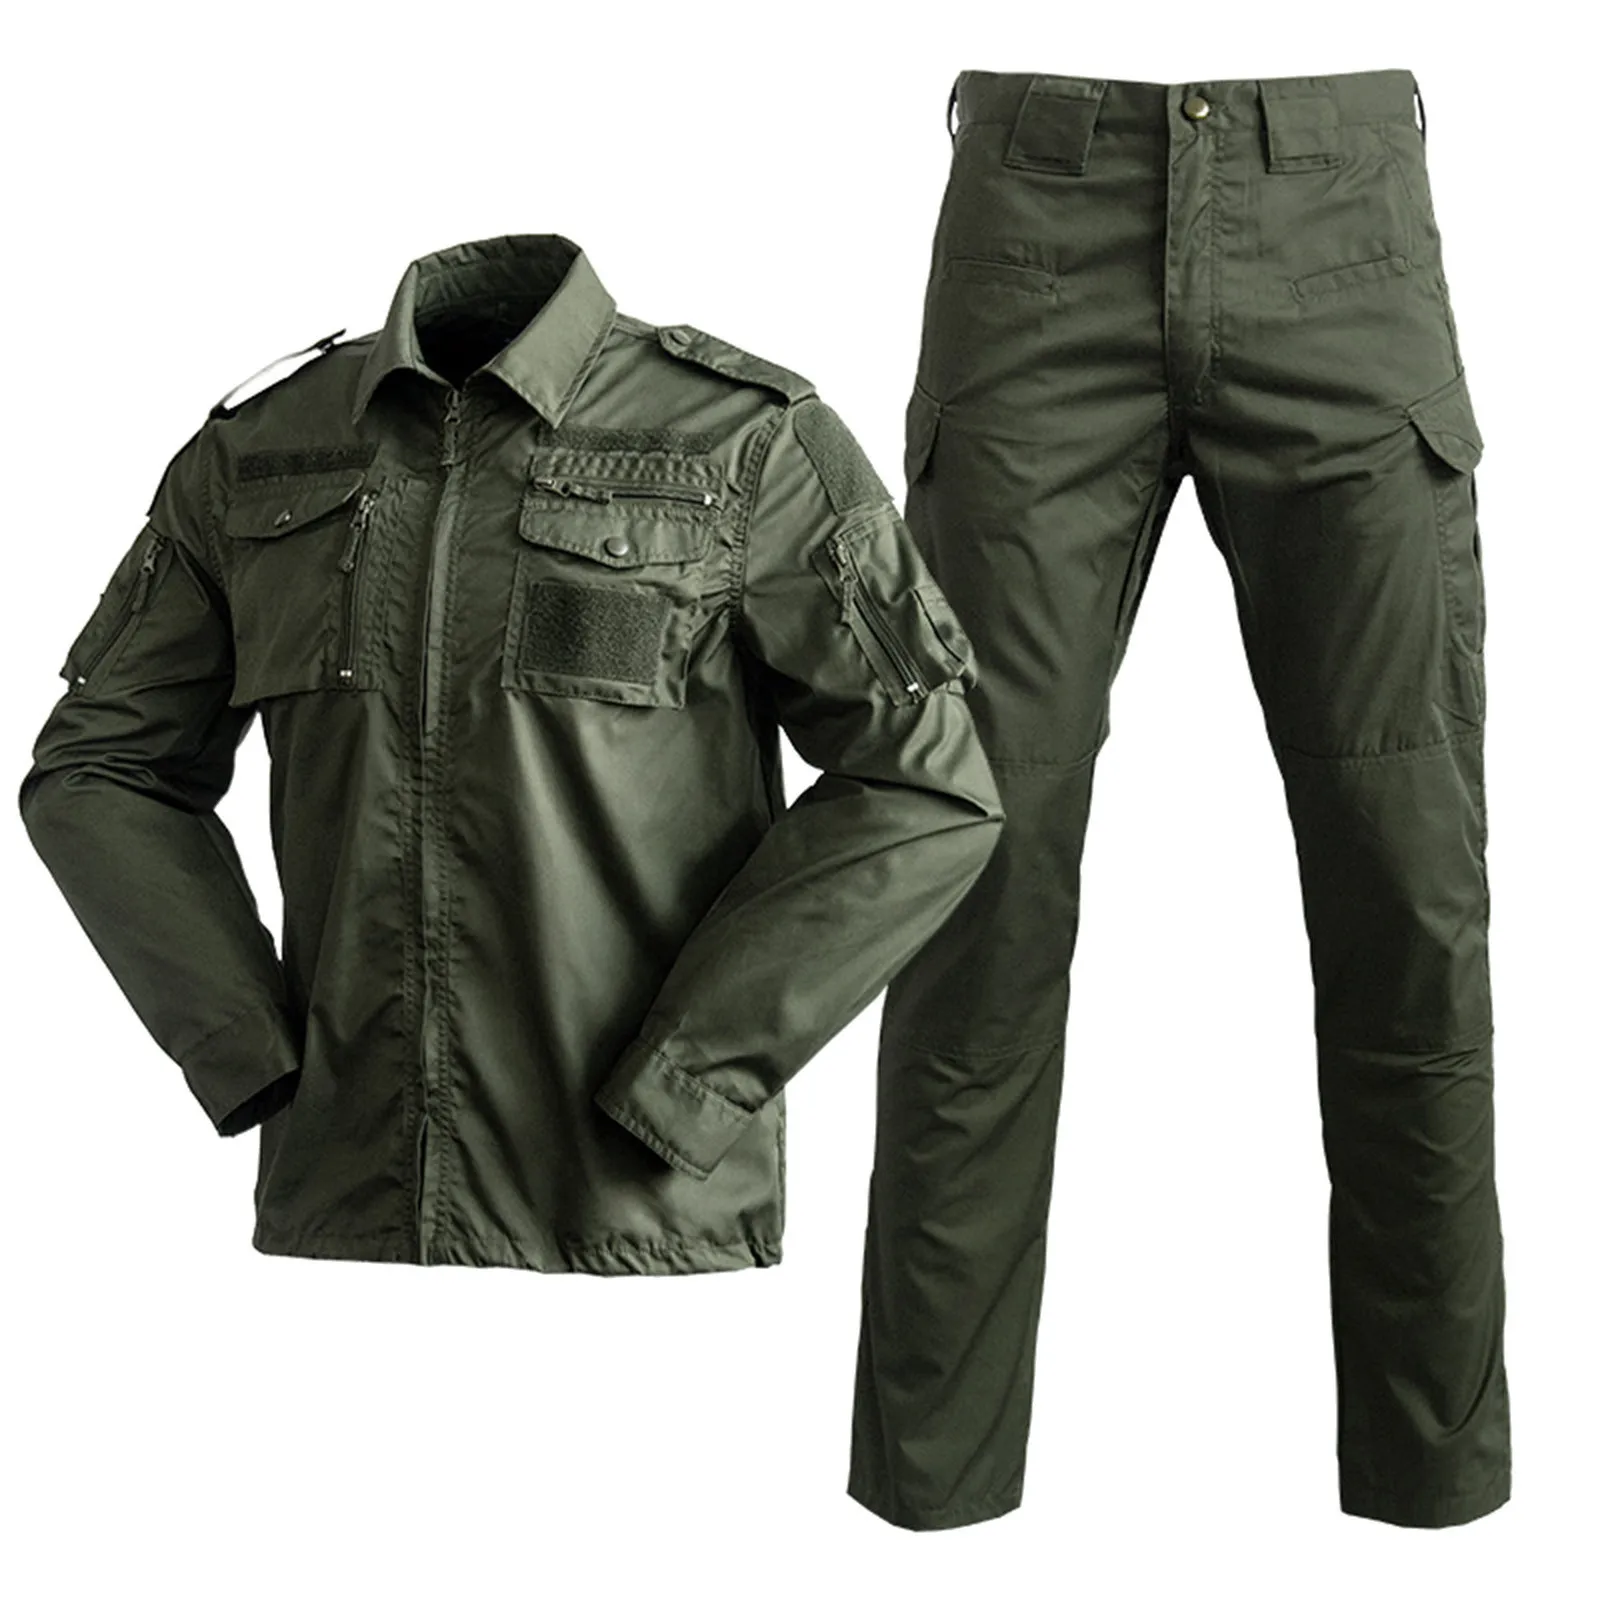 

Men's Safari Style Outdoor Camouflage Military Tactical Combat Set Field Fashion Casual Long Sleeved Training Overall Sets